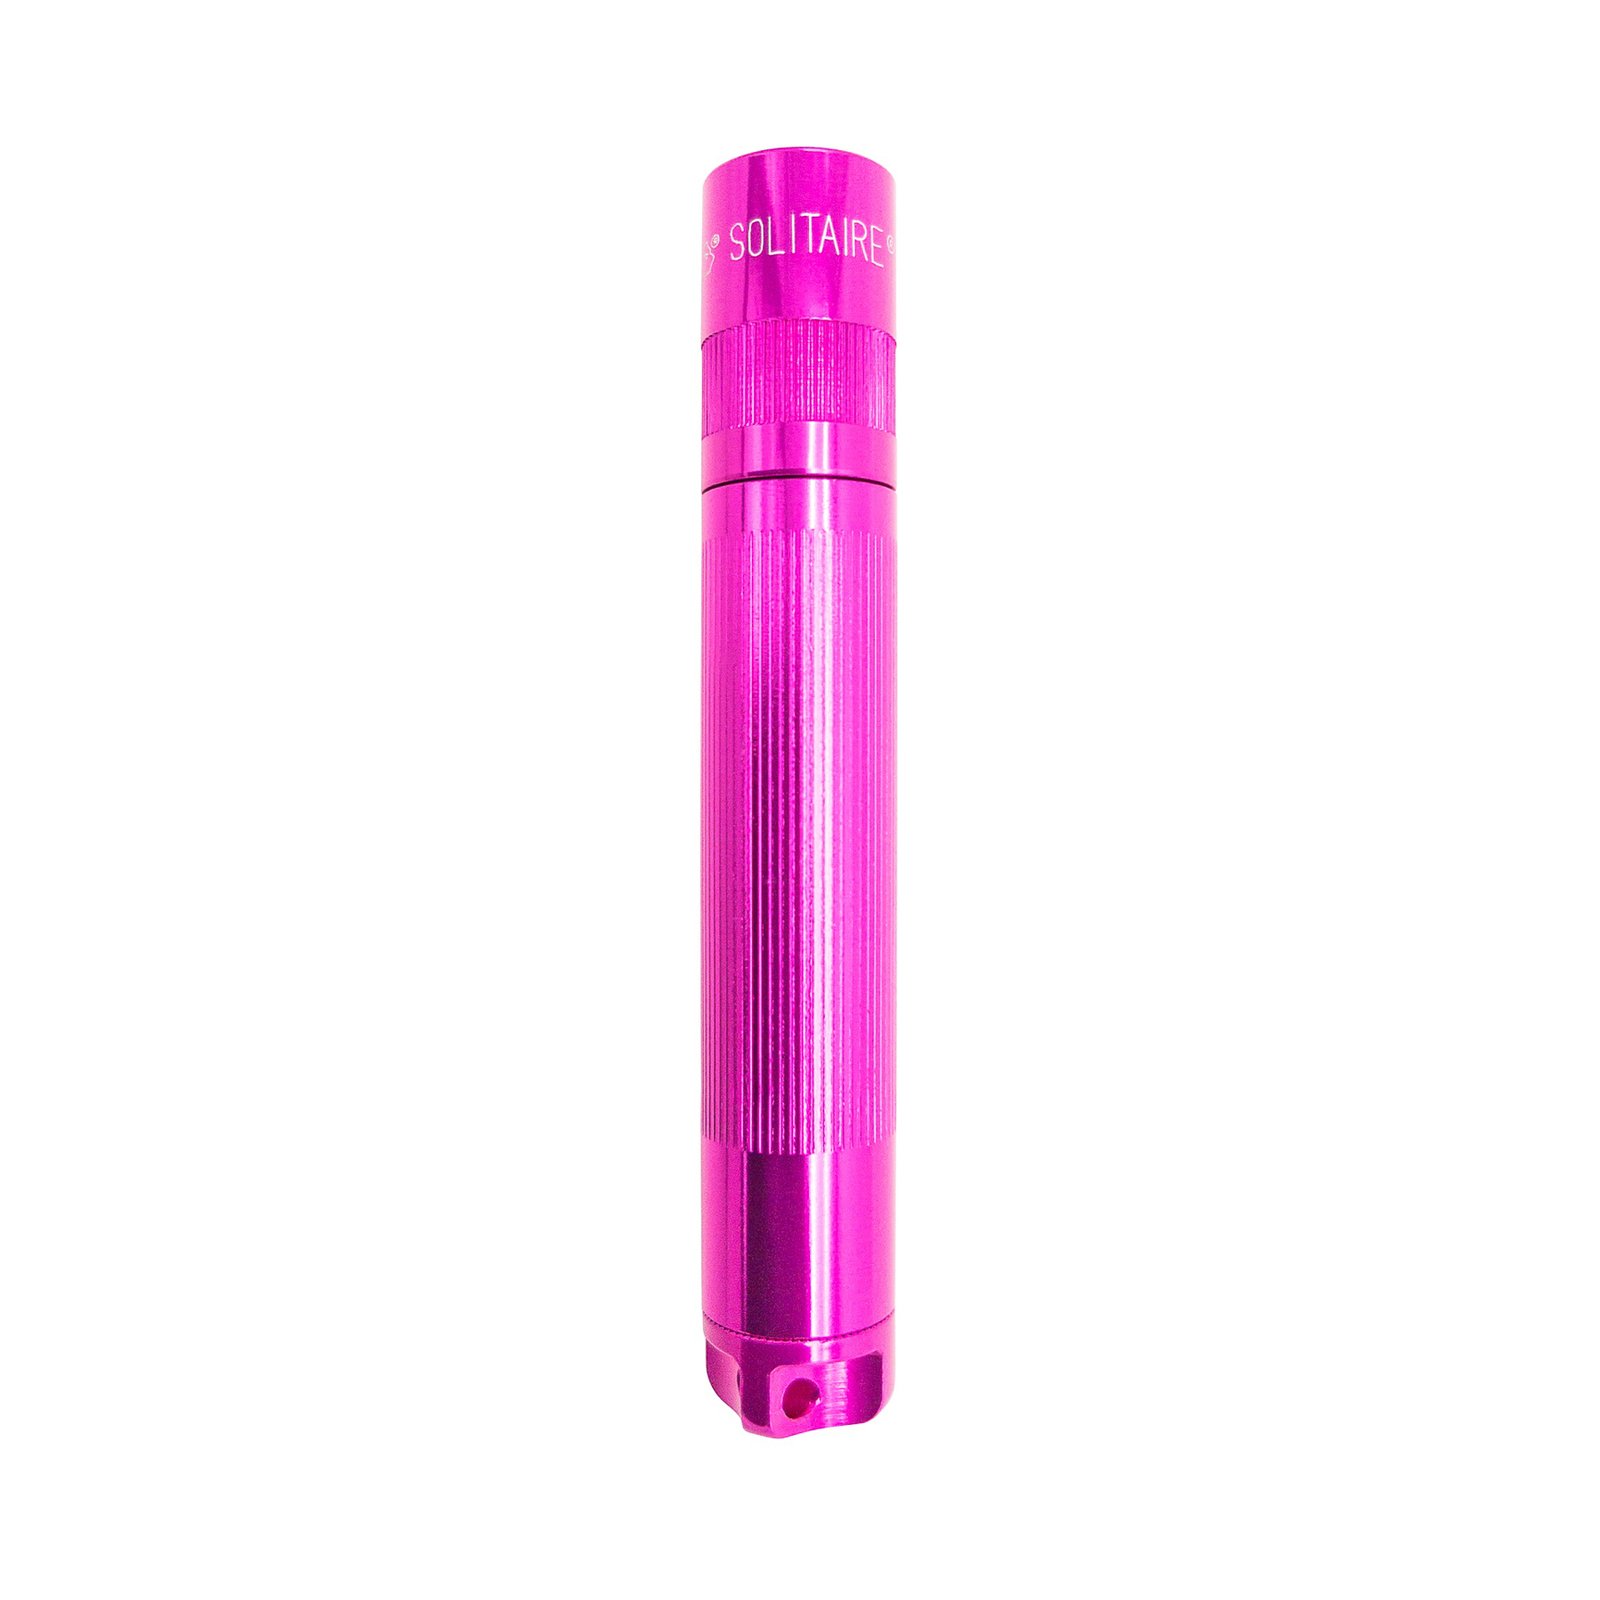 Maglite Xenon-Taschenlampe Solitaire 1-Cell AAA, pink